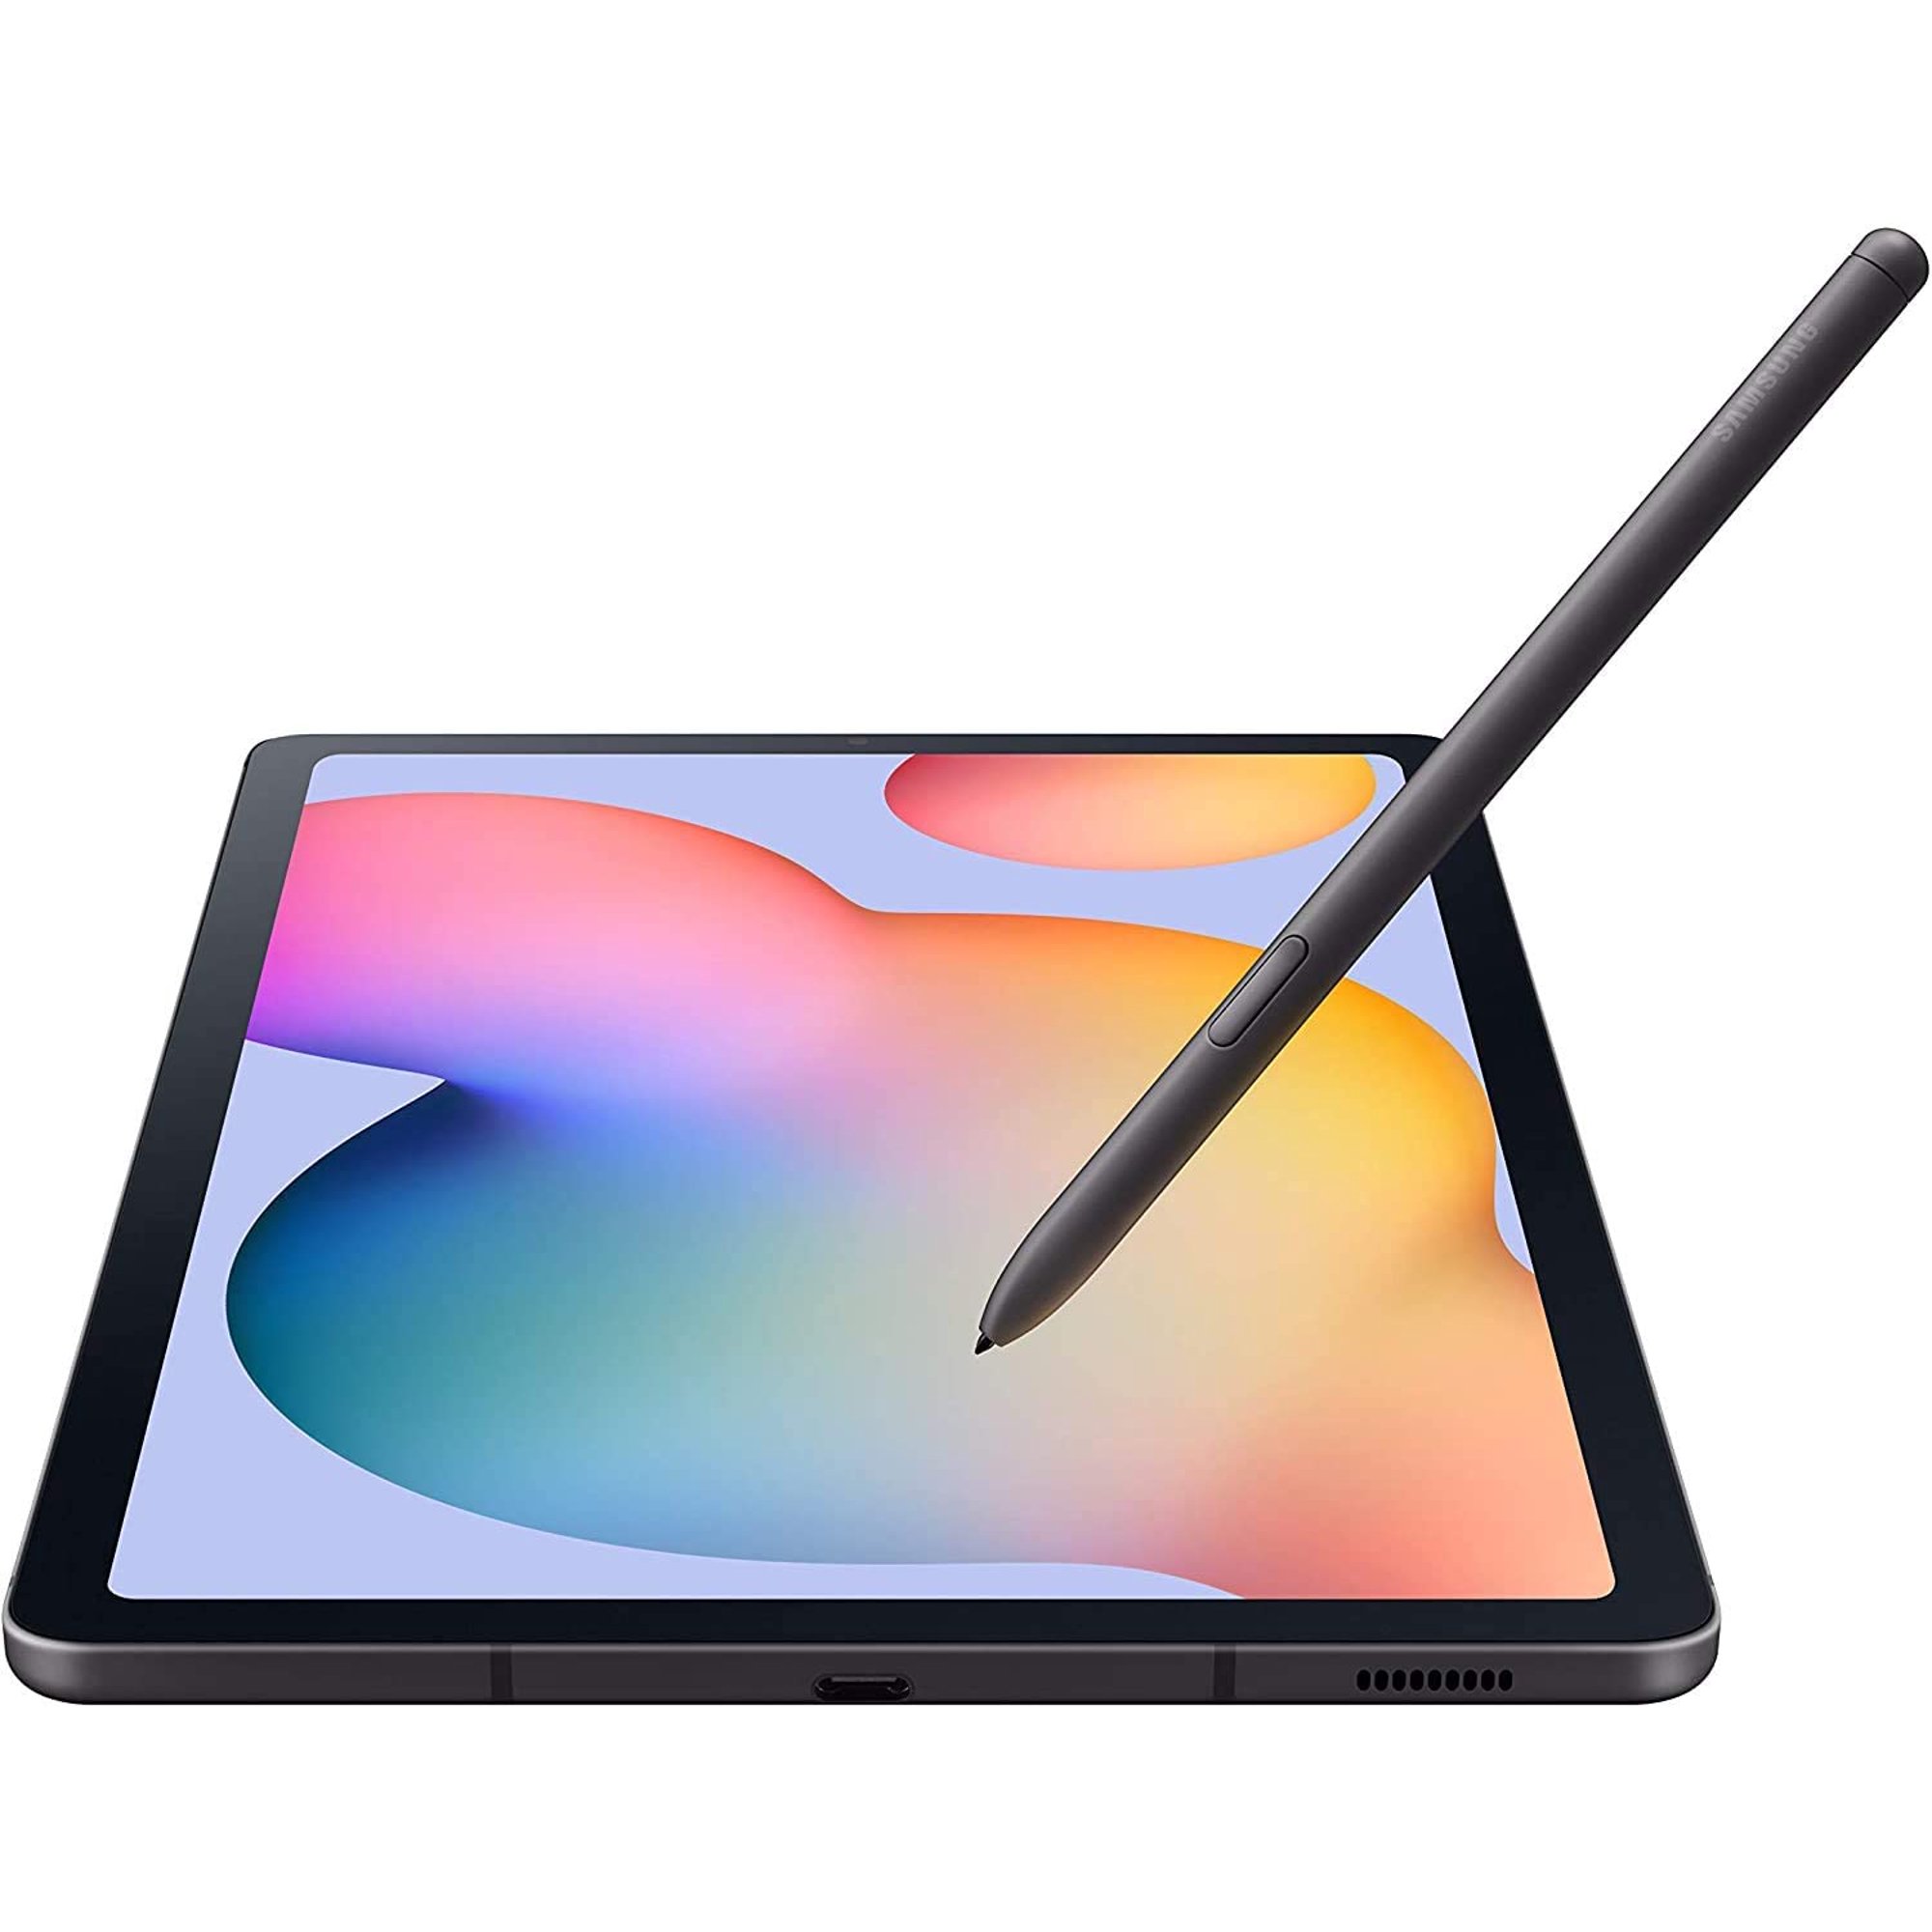 Samsung Galaxy Tab S6 Lite 10.4'' (2000x1200) WiFi Tablet Bundle, Exynos 9610, 4GB RAM, 64GB Storage, Bluetooth, Front & Rear Camera, Android 10, S Pen, Tablet Cover with Mazepoly Accessories - image 2 of 7